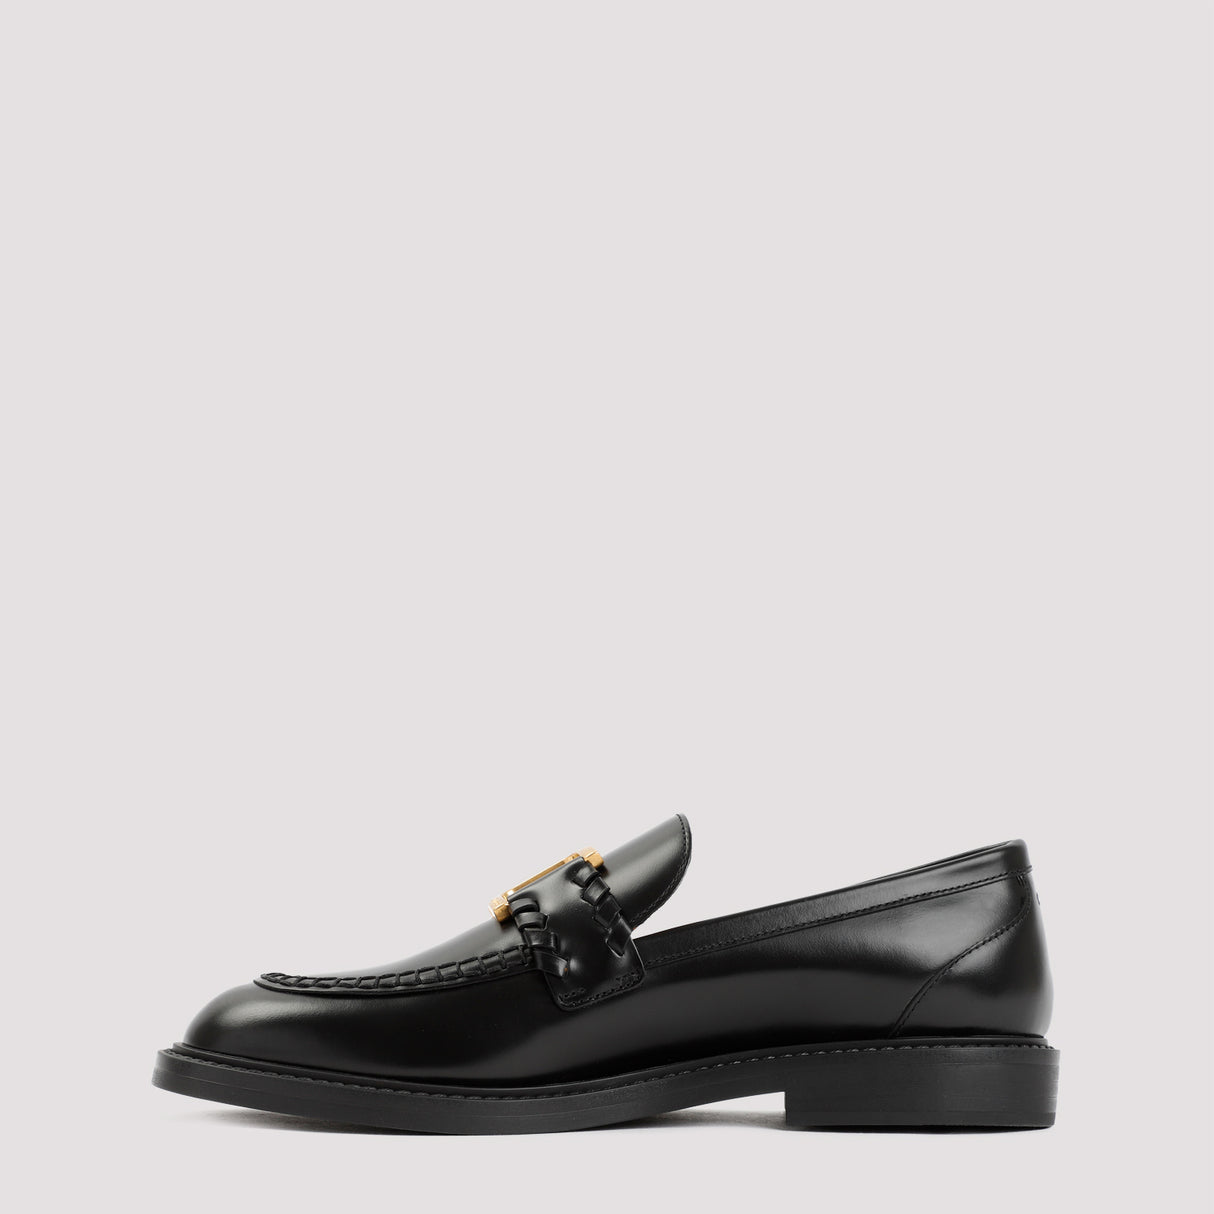 CHLOÉ Classic Black Loafers for Women - Chic and Timeless